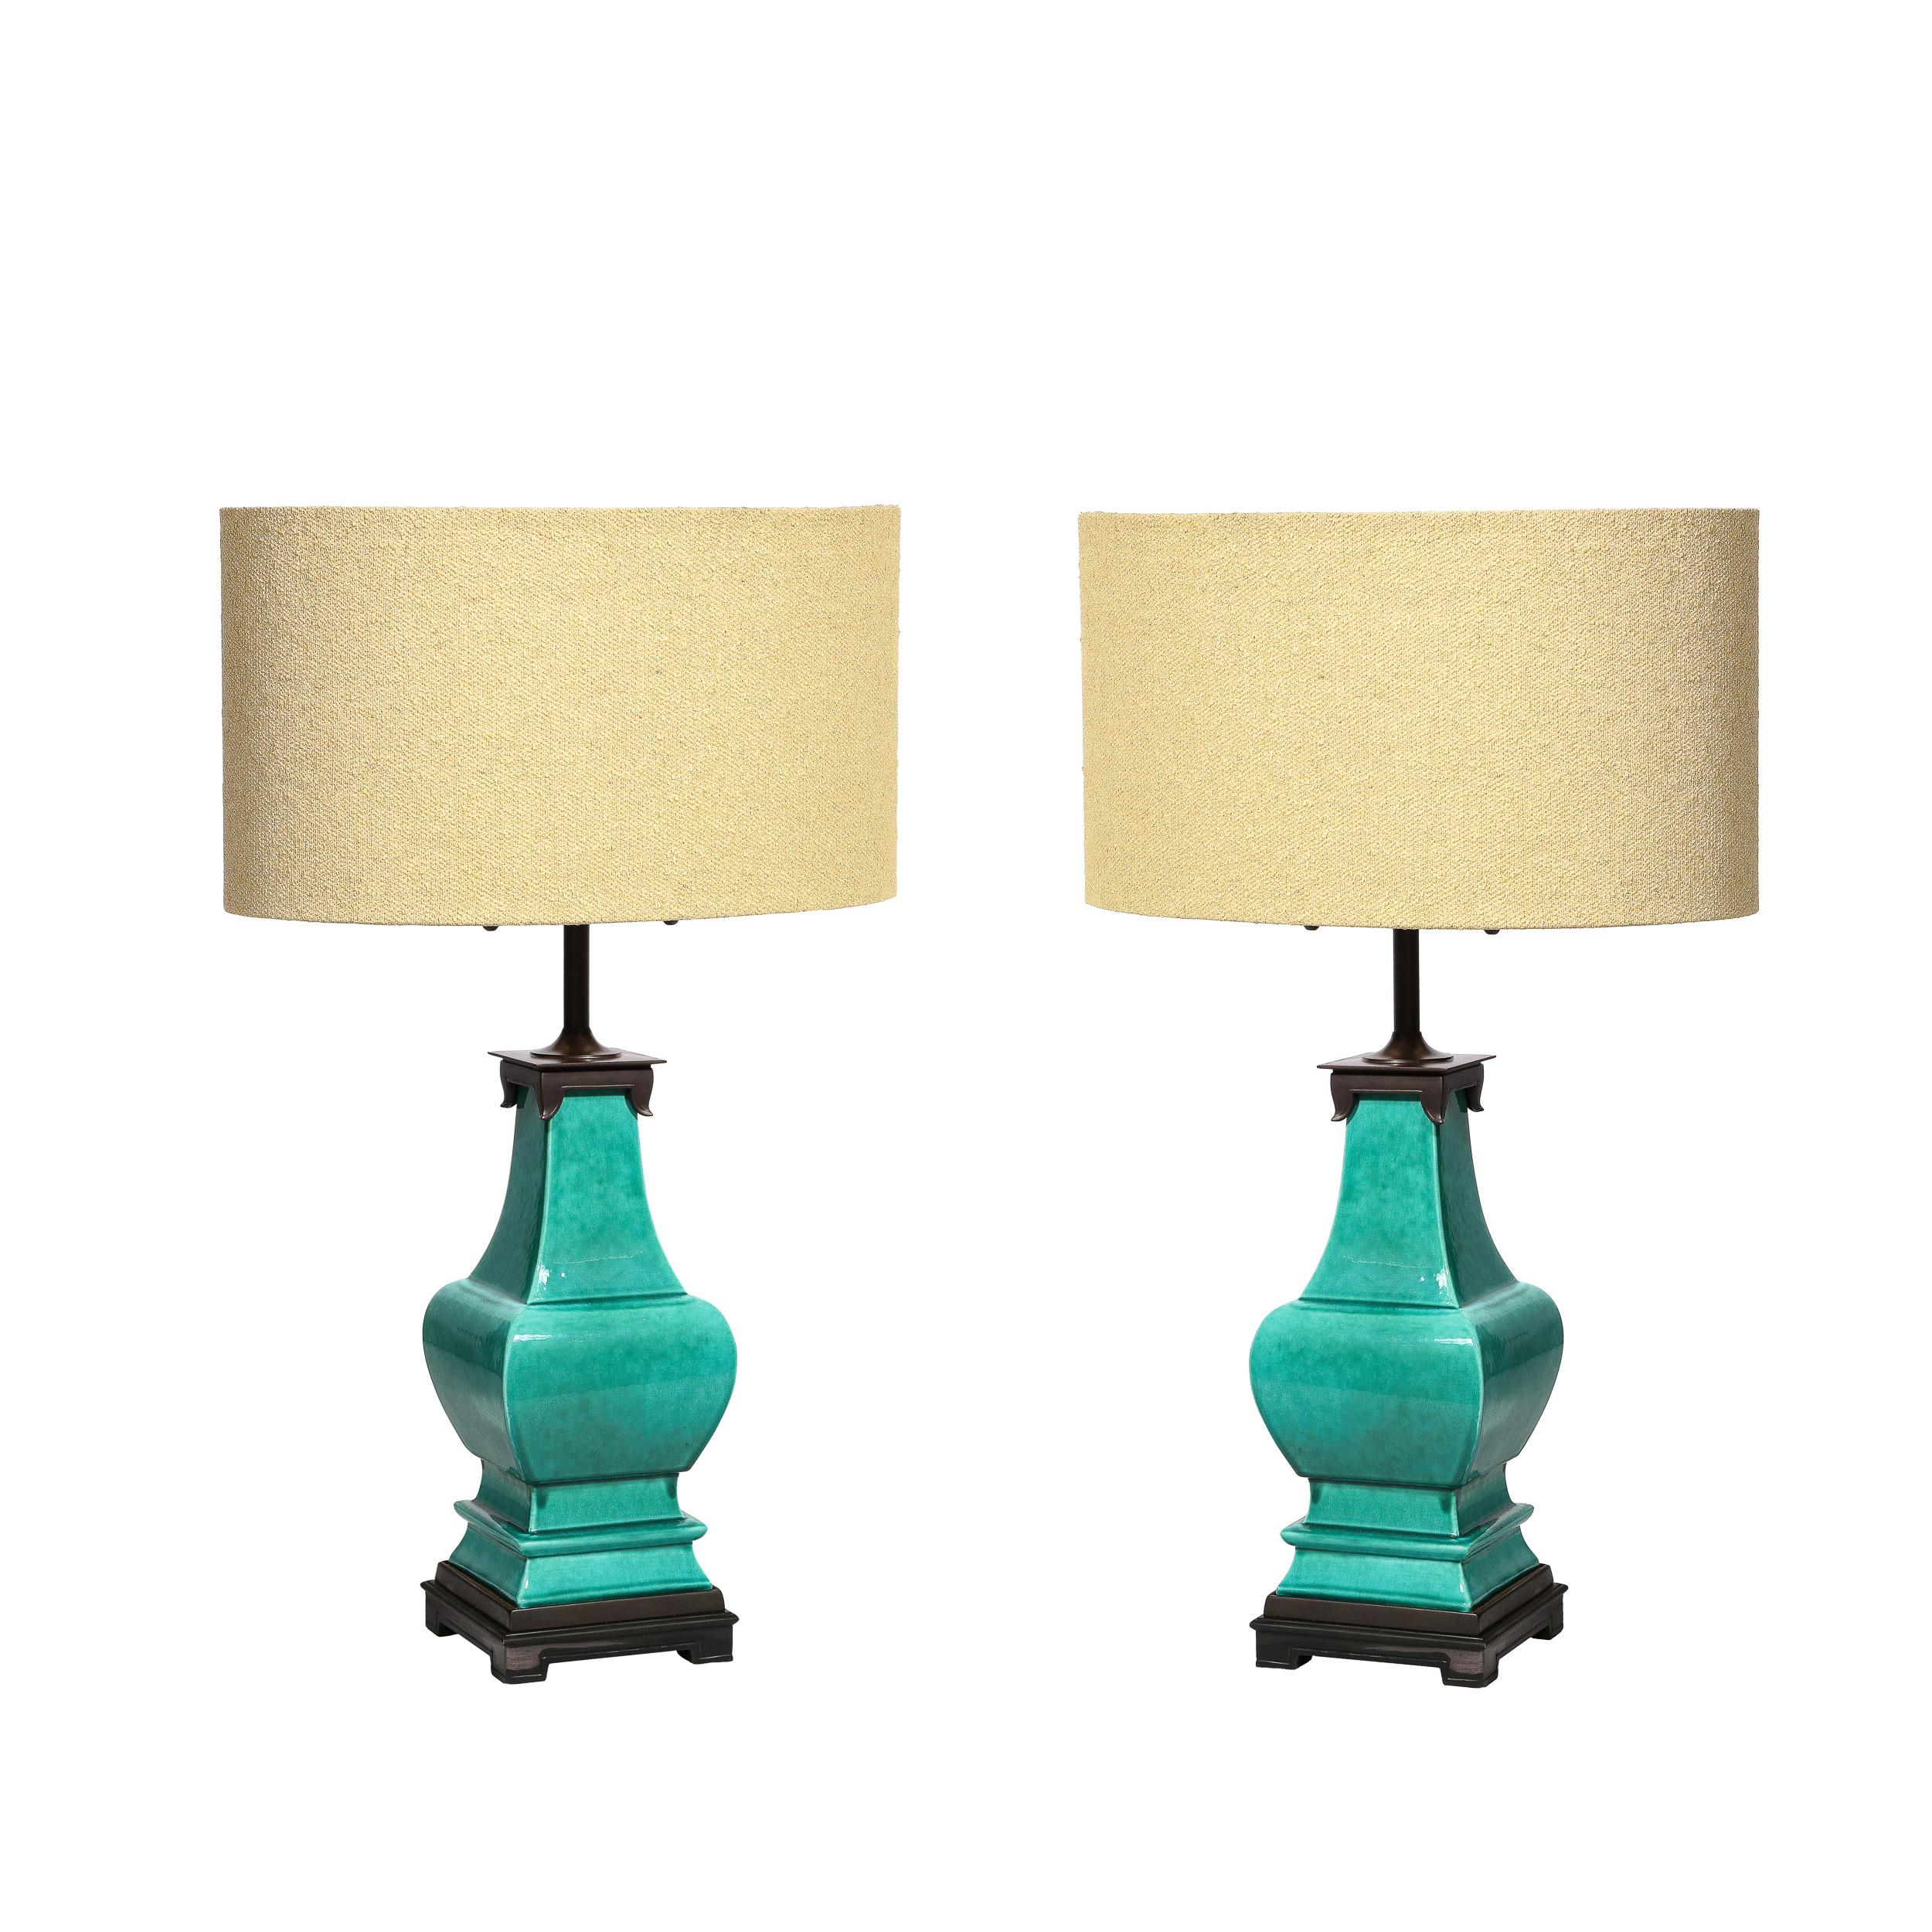 Mid-Century Modernist Ceramic Turquoise Jade Table Lamps w/ Bronze Fittings